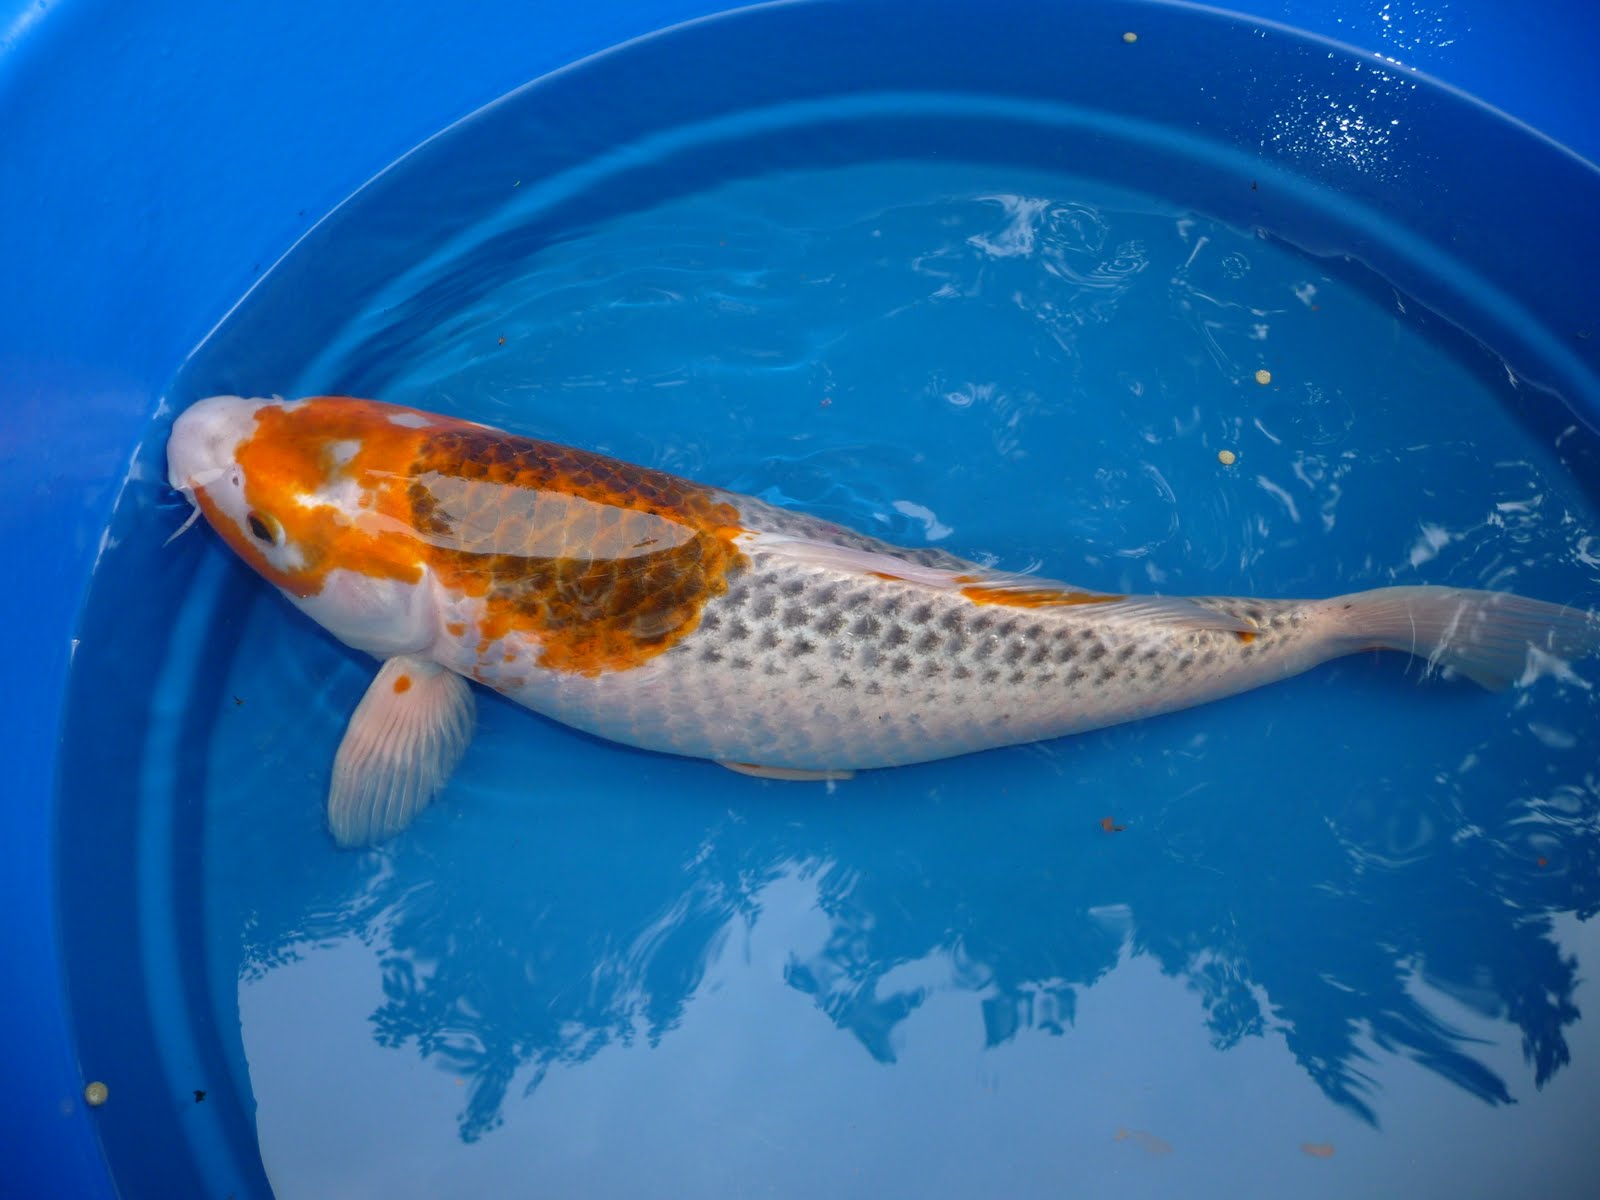 Living with Koi: More Pictures of my Koi